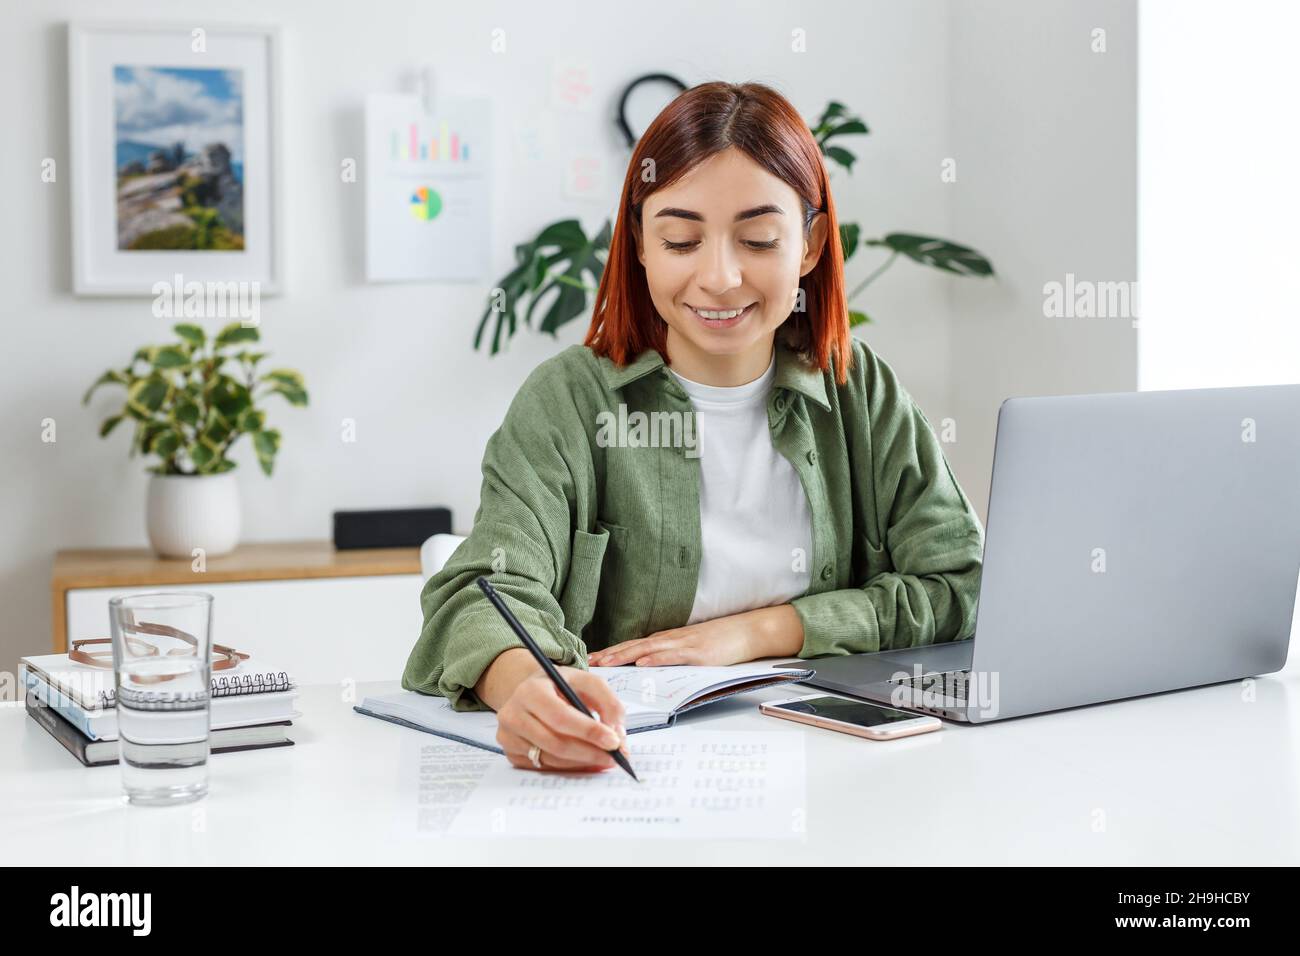 Woman remotely working at home with laptop computer. Young businesswoman planning her time. Concept of online business, freelance, home office and tel Stock Photo